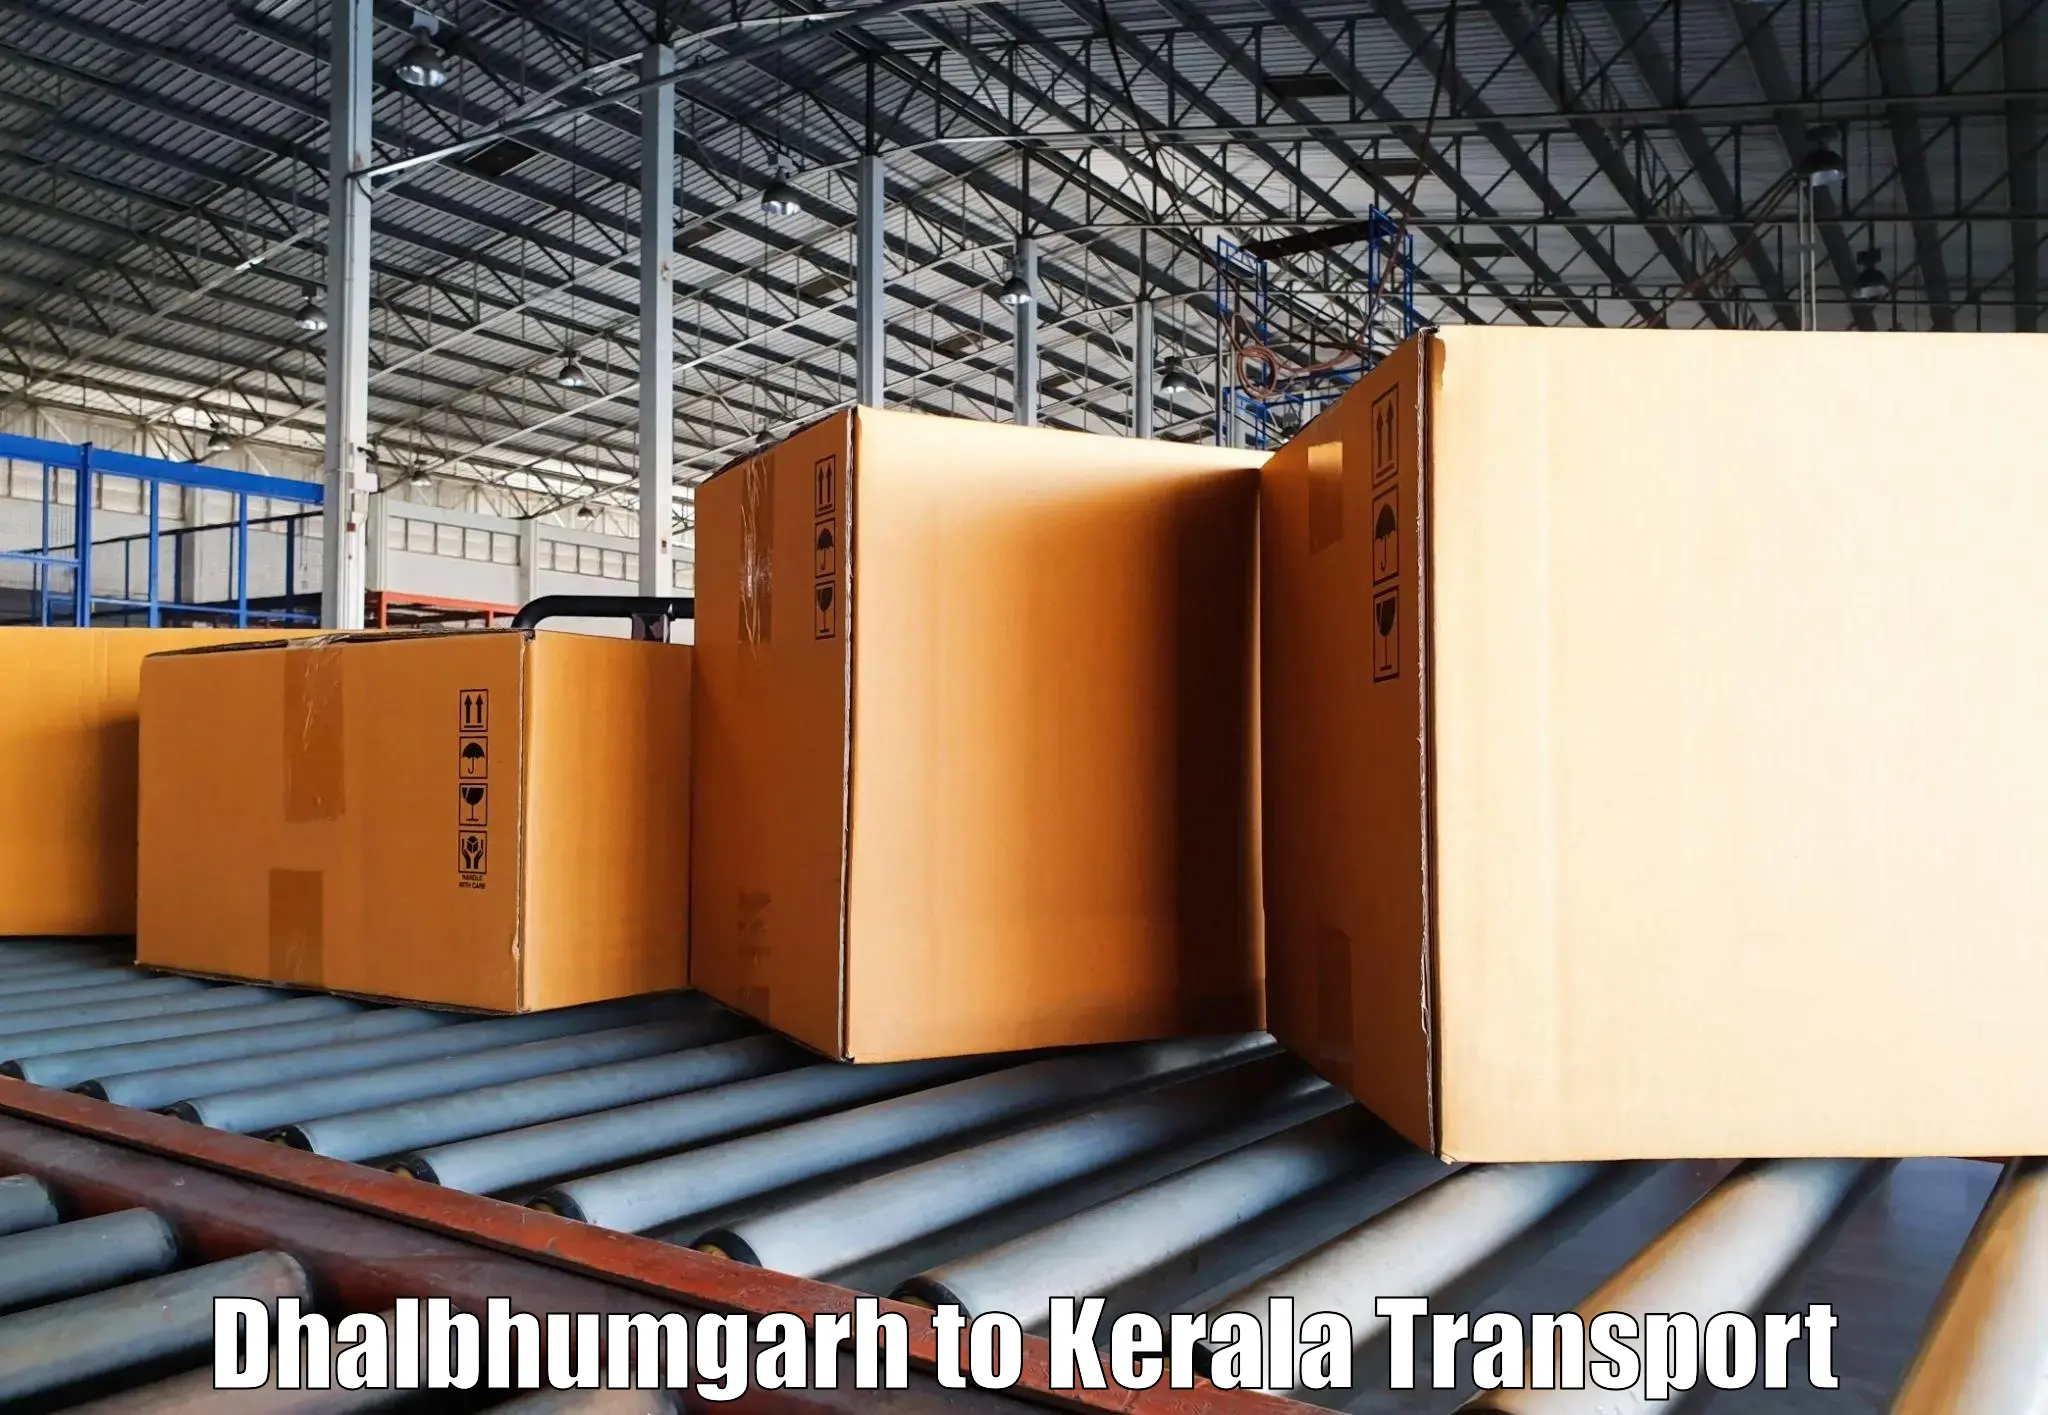 Furniture transport service Dhalbhumgarh to Cochin University of Science and Technology